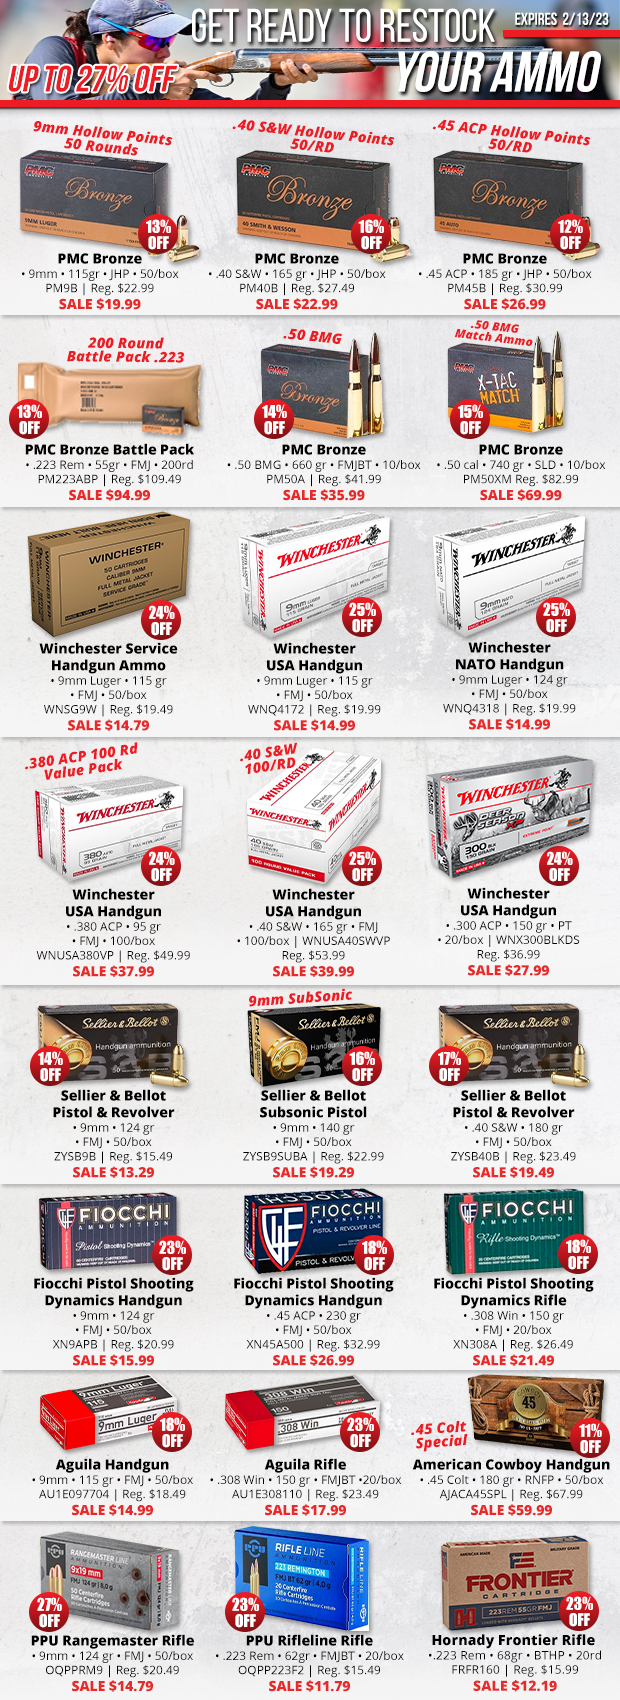 Ammo Deals Up to 27% Off